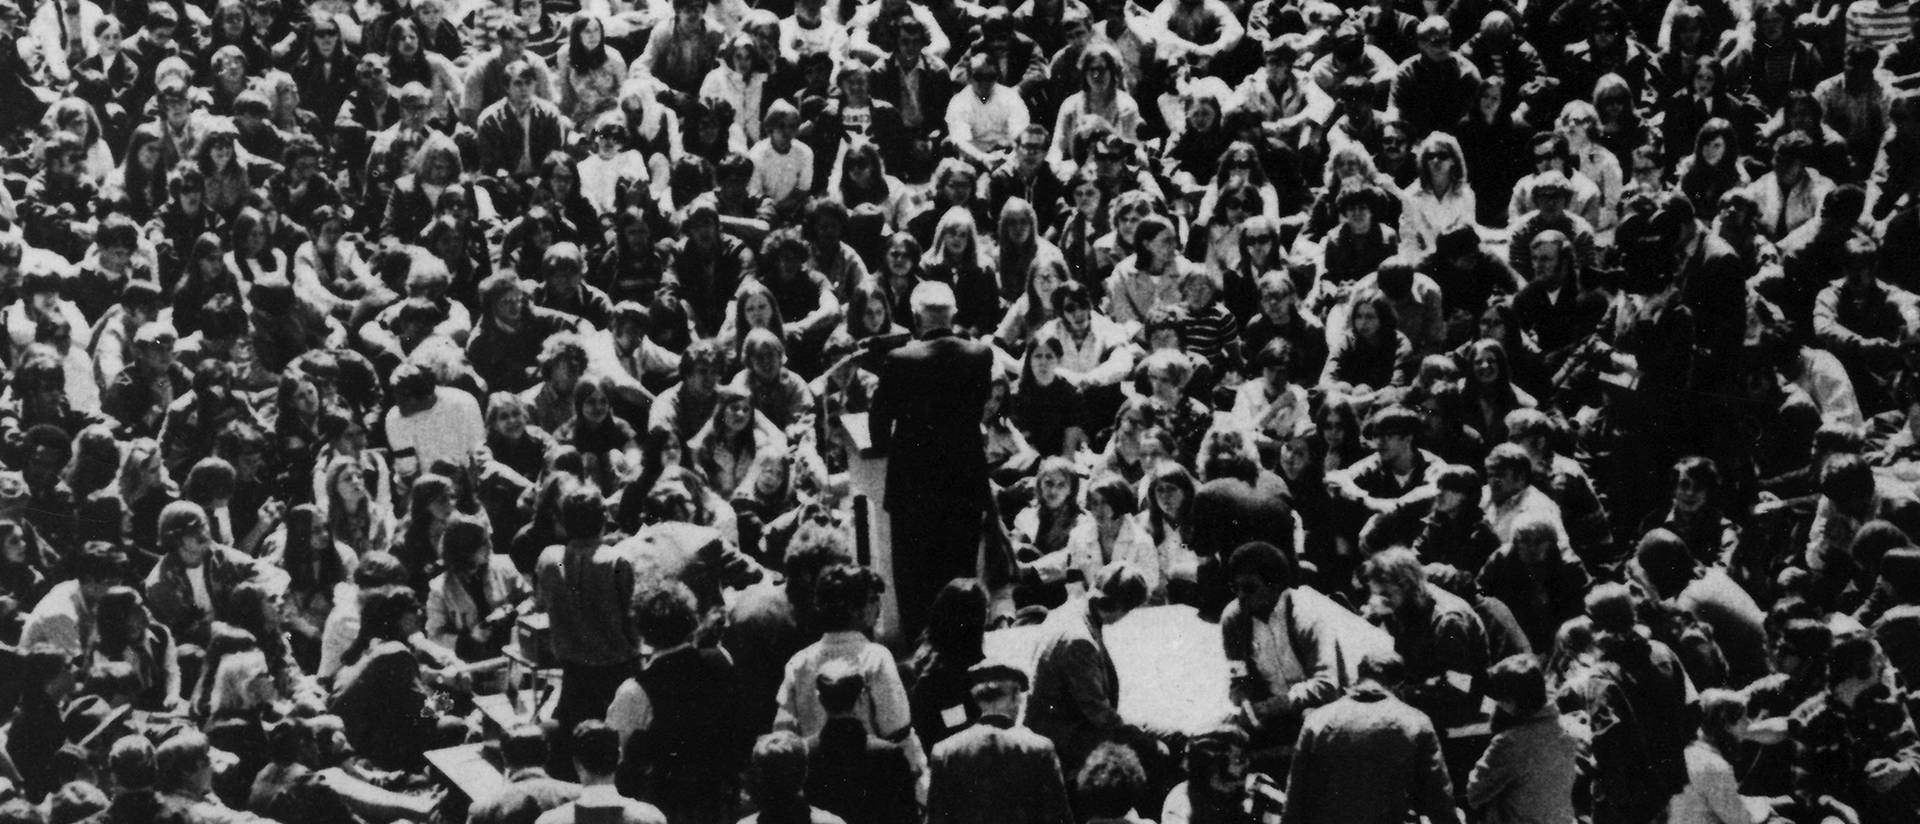 Wisconsin State University-Eau Claire President Leonard Haas addresses 3,500 students on campus May 6, 1970. Photo credit Bill Edgar.